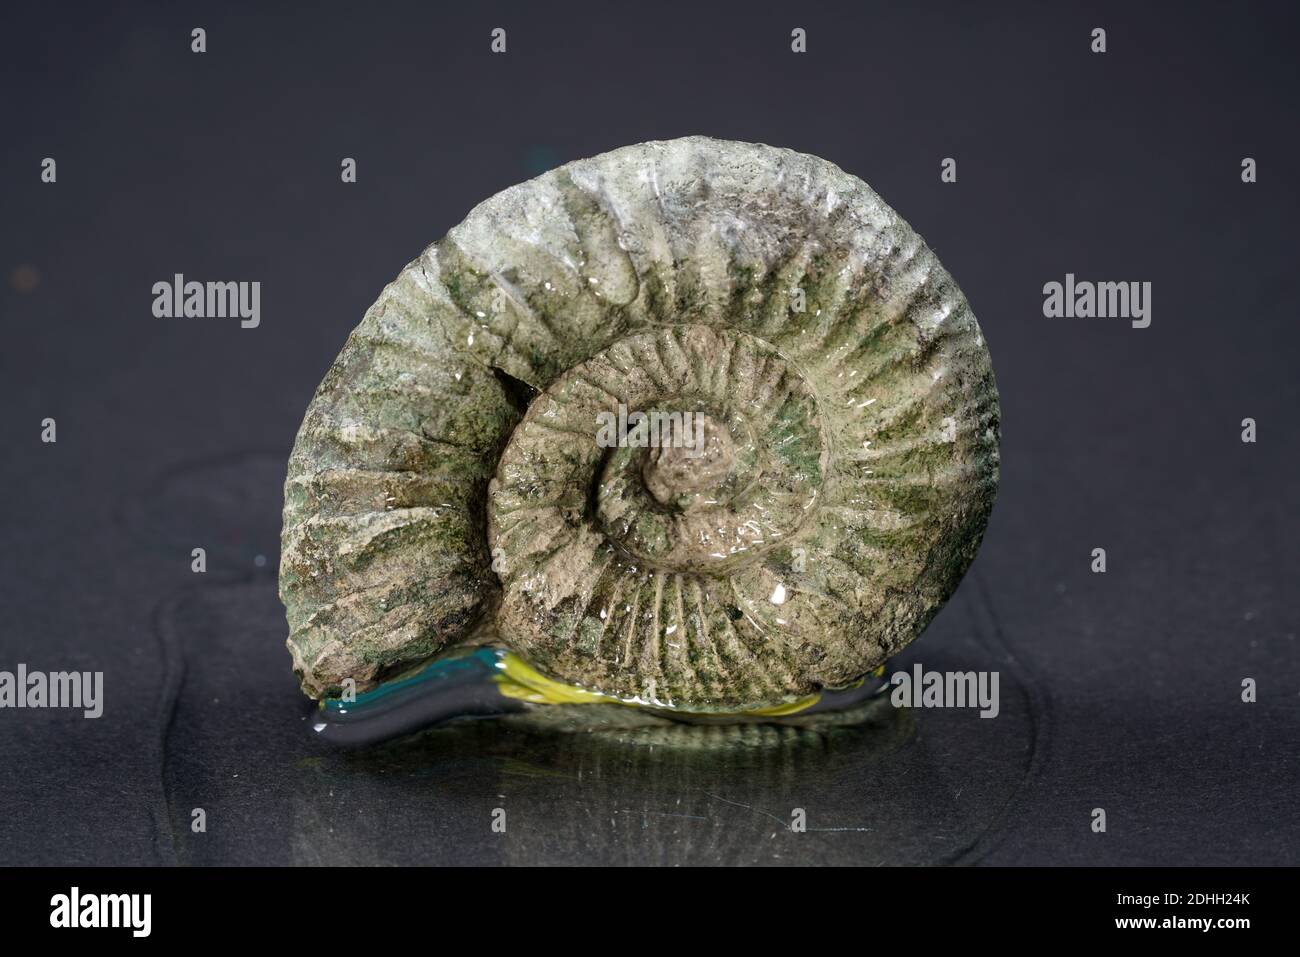 A closeup of an ammonite on the flat surfac Stock Photo